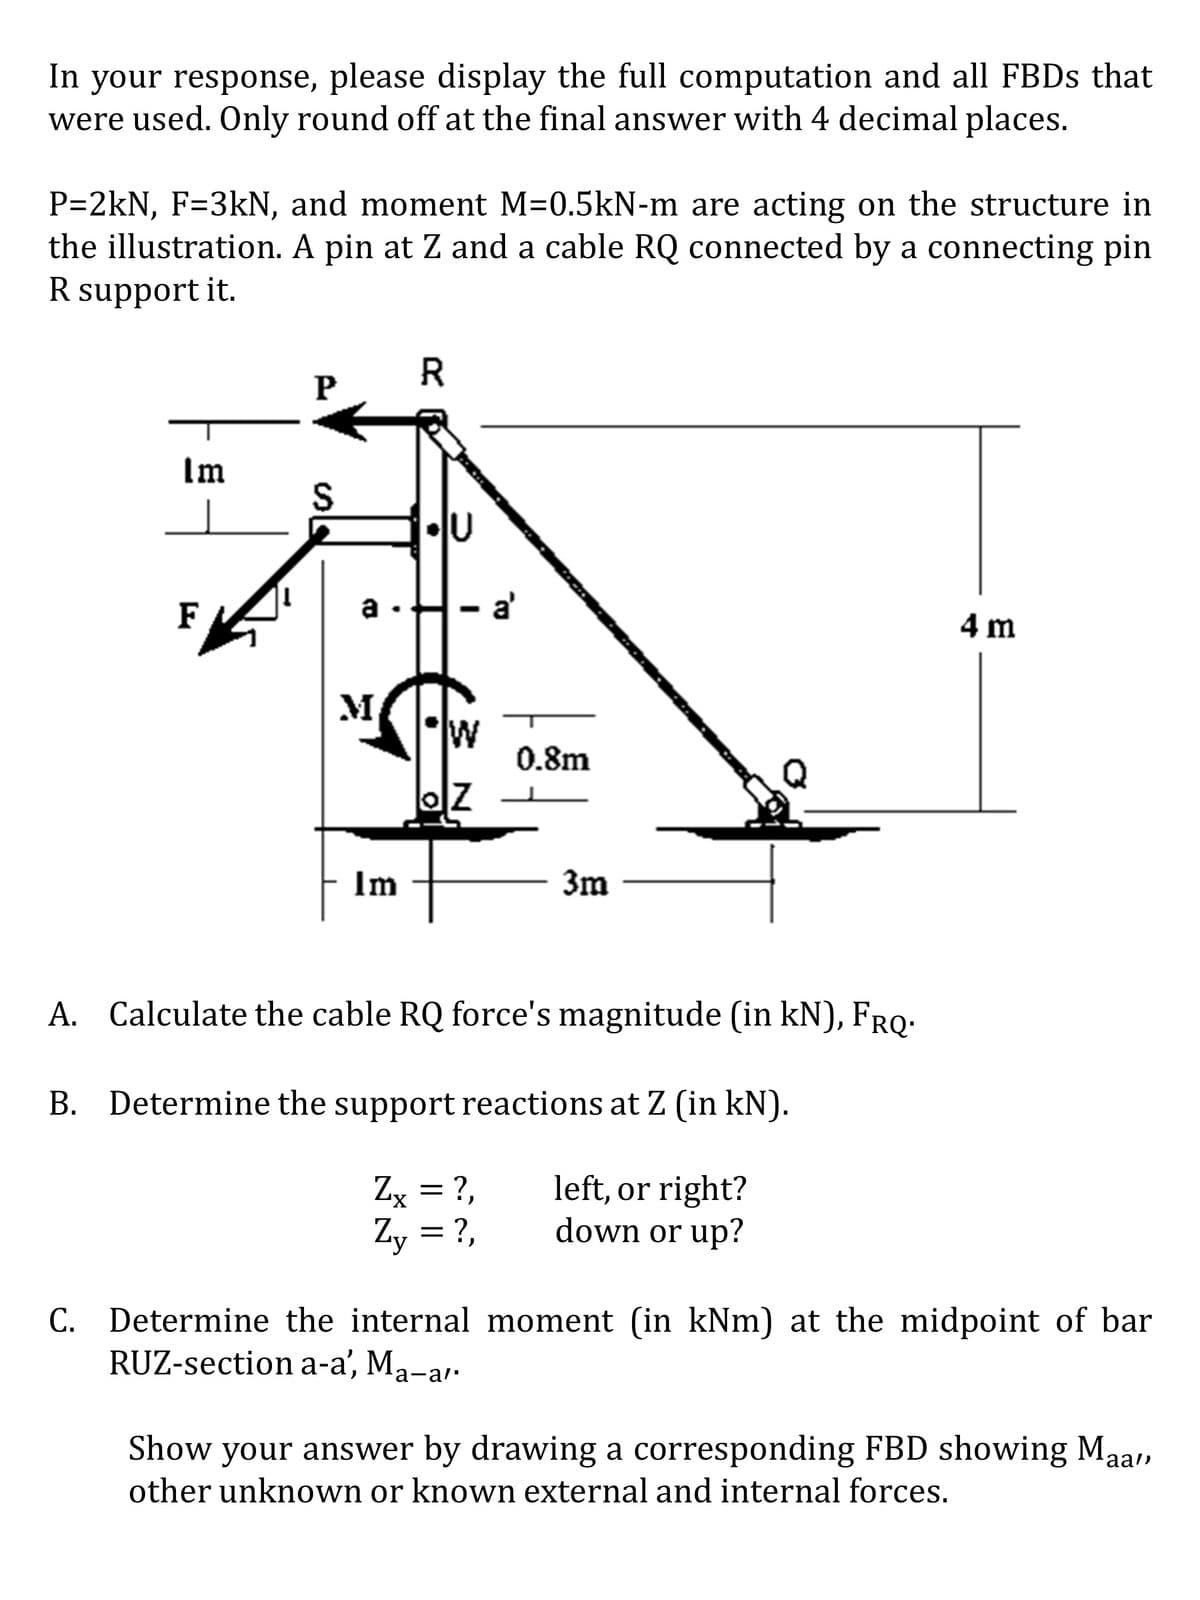 In your response, please display the full computation and all FBDs that
were used. Only round off at the final answer with 4 decimal places.
P=2kN, F=3kN, and moment M=0.5kN-m are acting on the structure in
the illustration. A pin at Z and a cable RQ connected by a connecting pin
R support it.
Im
F
P
S
a
M
Im
R
IU
- a'
W
0.8m
3m
A. Calculate the cable RQ force's magnitude (in kN), FRQ.
B. Determine the support reactions at Z (in kN).
Zx = ?,
left, or right?
Zy = ?,
down or up?
4 m
C. Determine the internal moment (in kNm) at the midpoint of bar
RUZ-section a-a', Ma-a'.
Show your answer by drawing a corresponding FBD showing Maa",
other unknown or known external and internal forces.